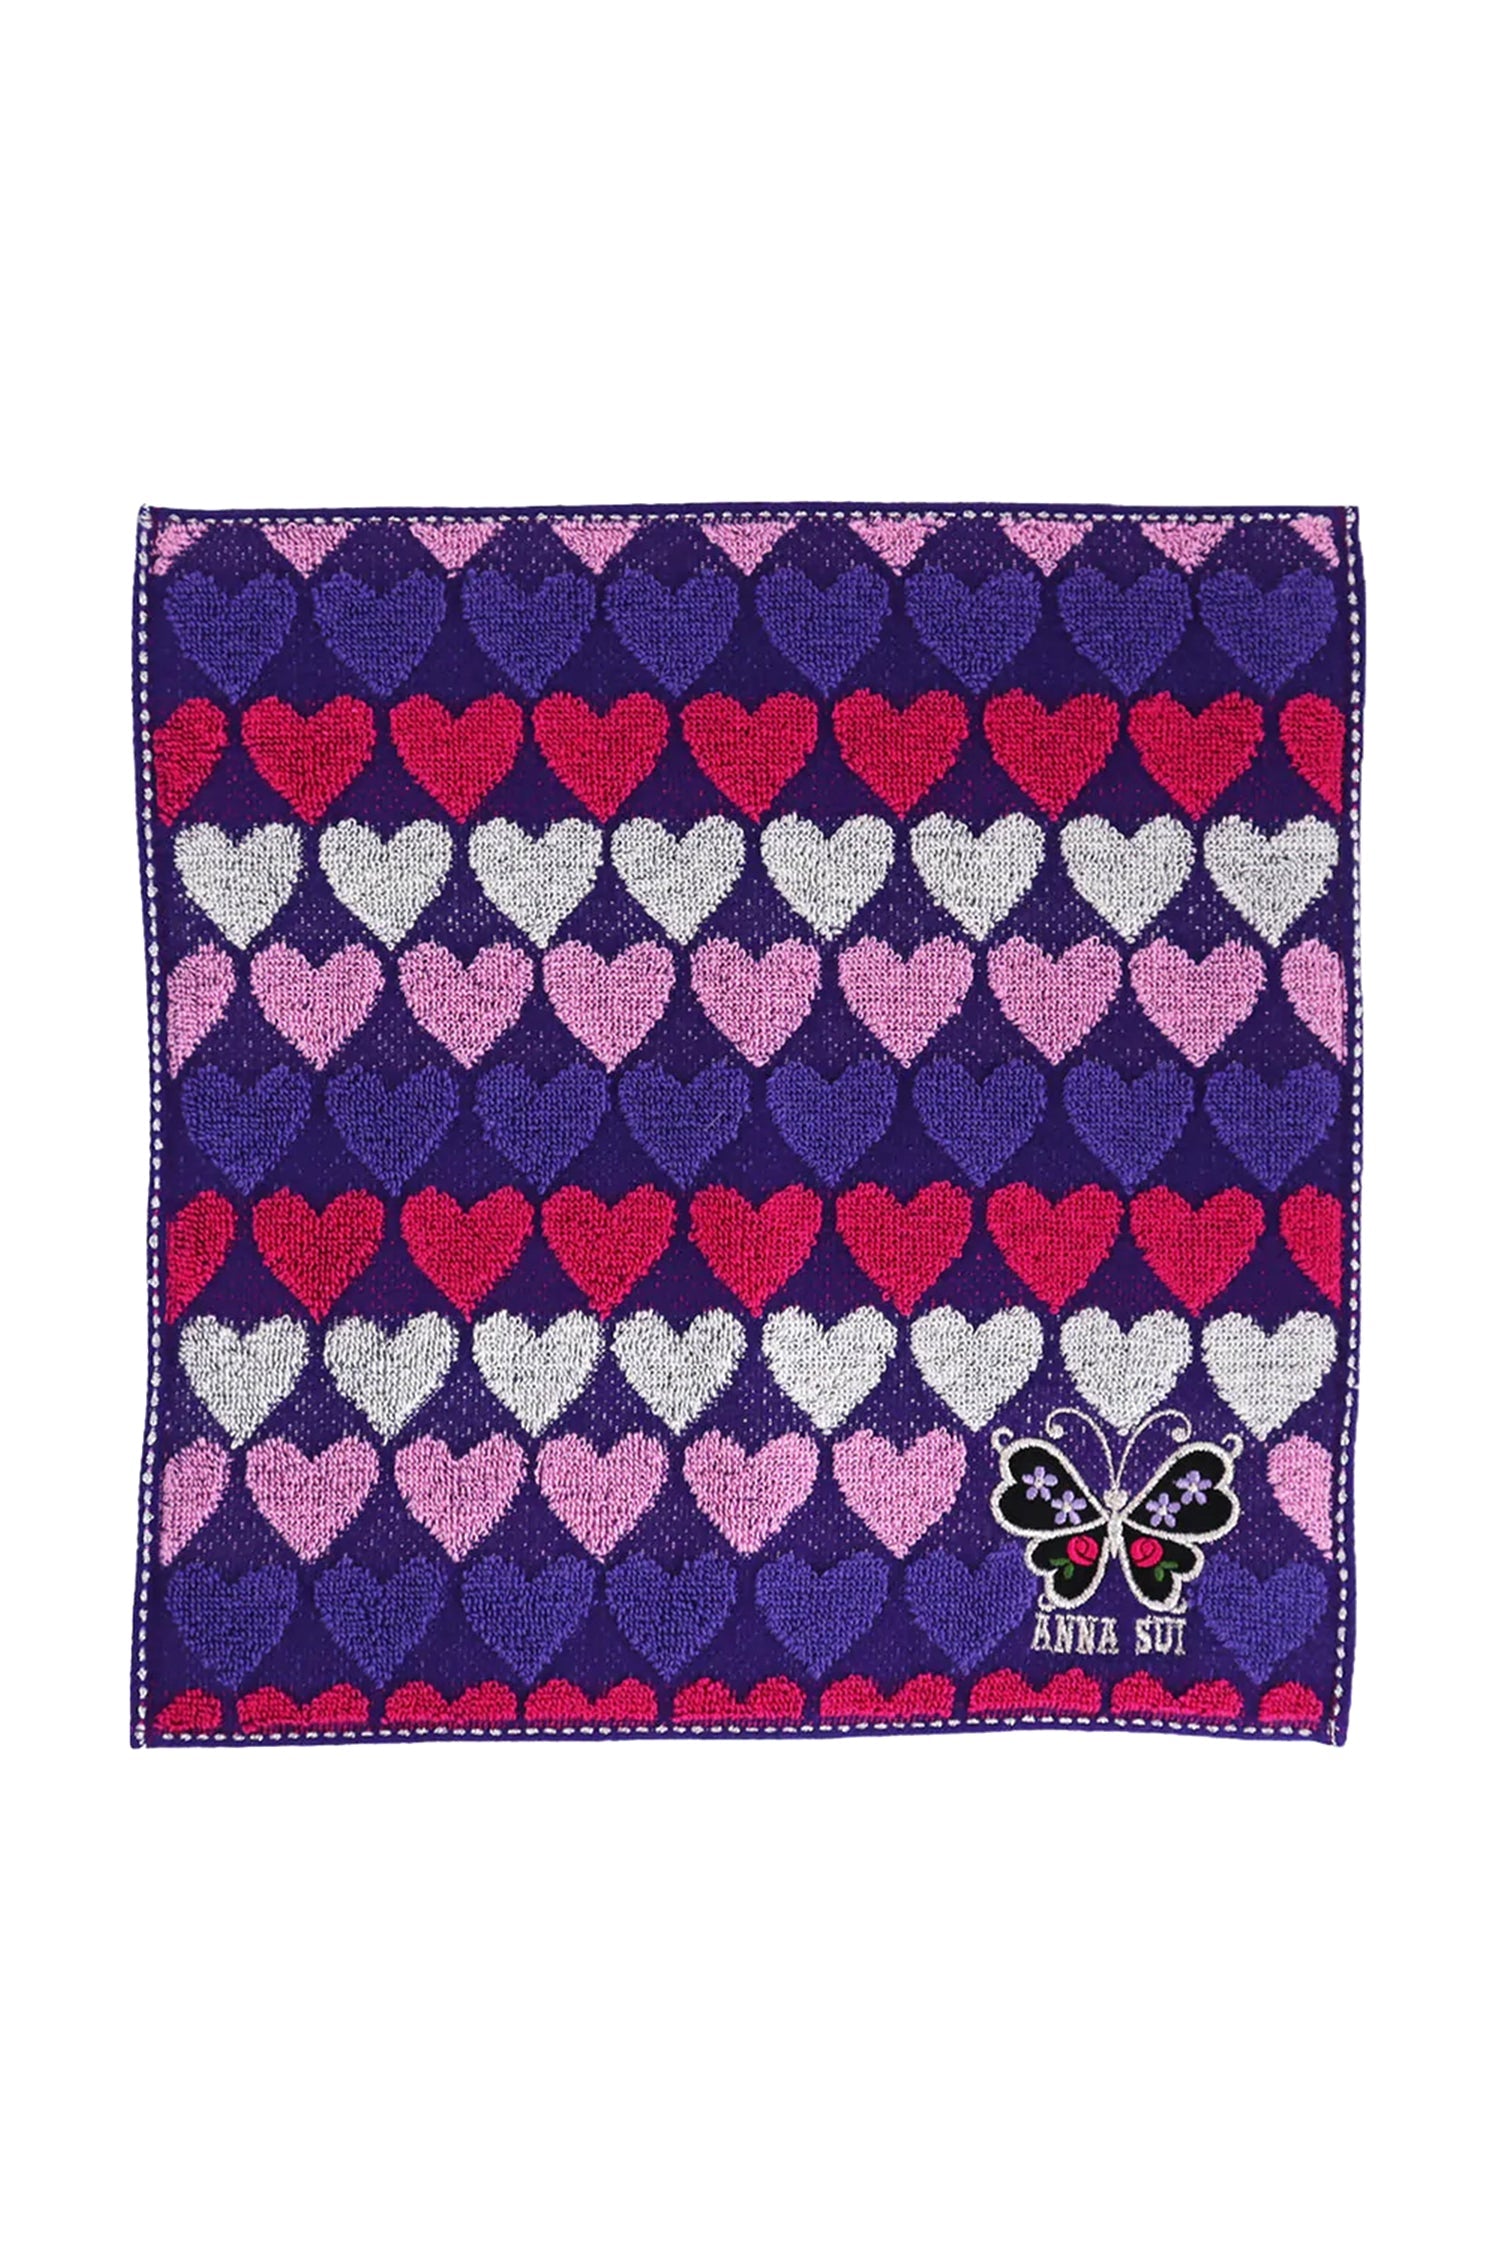 Butterfly Hearts Washcloth - Anna Sui